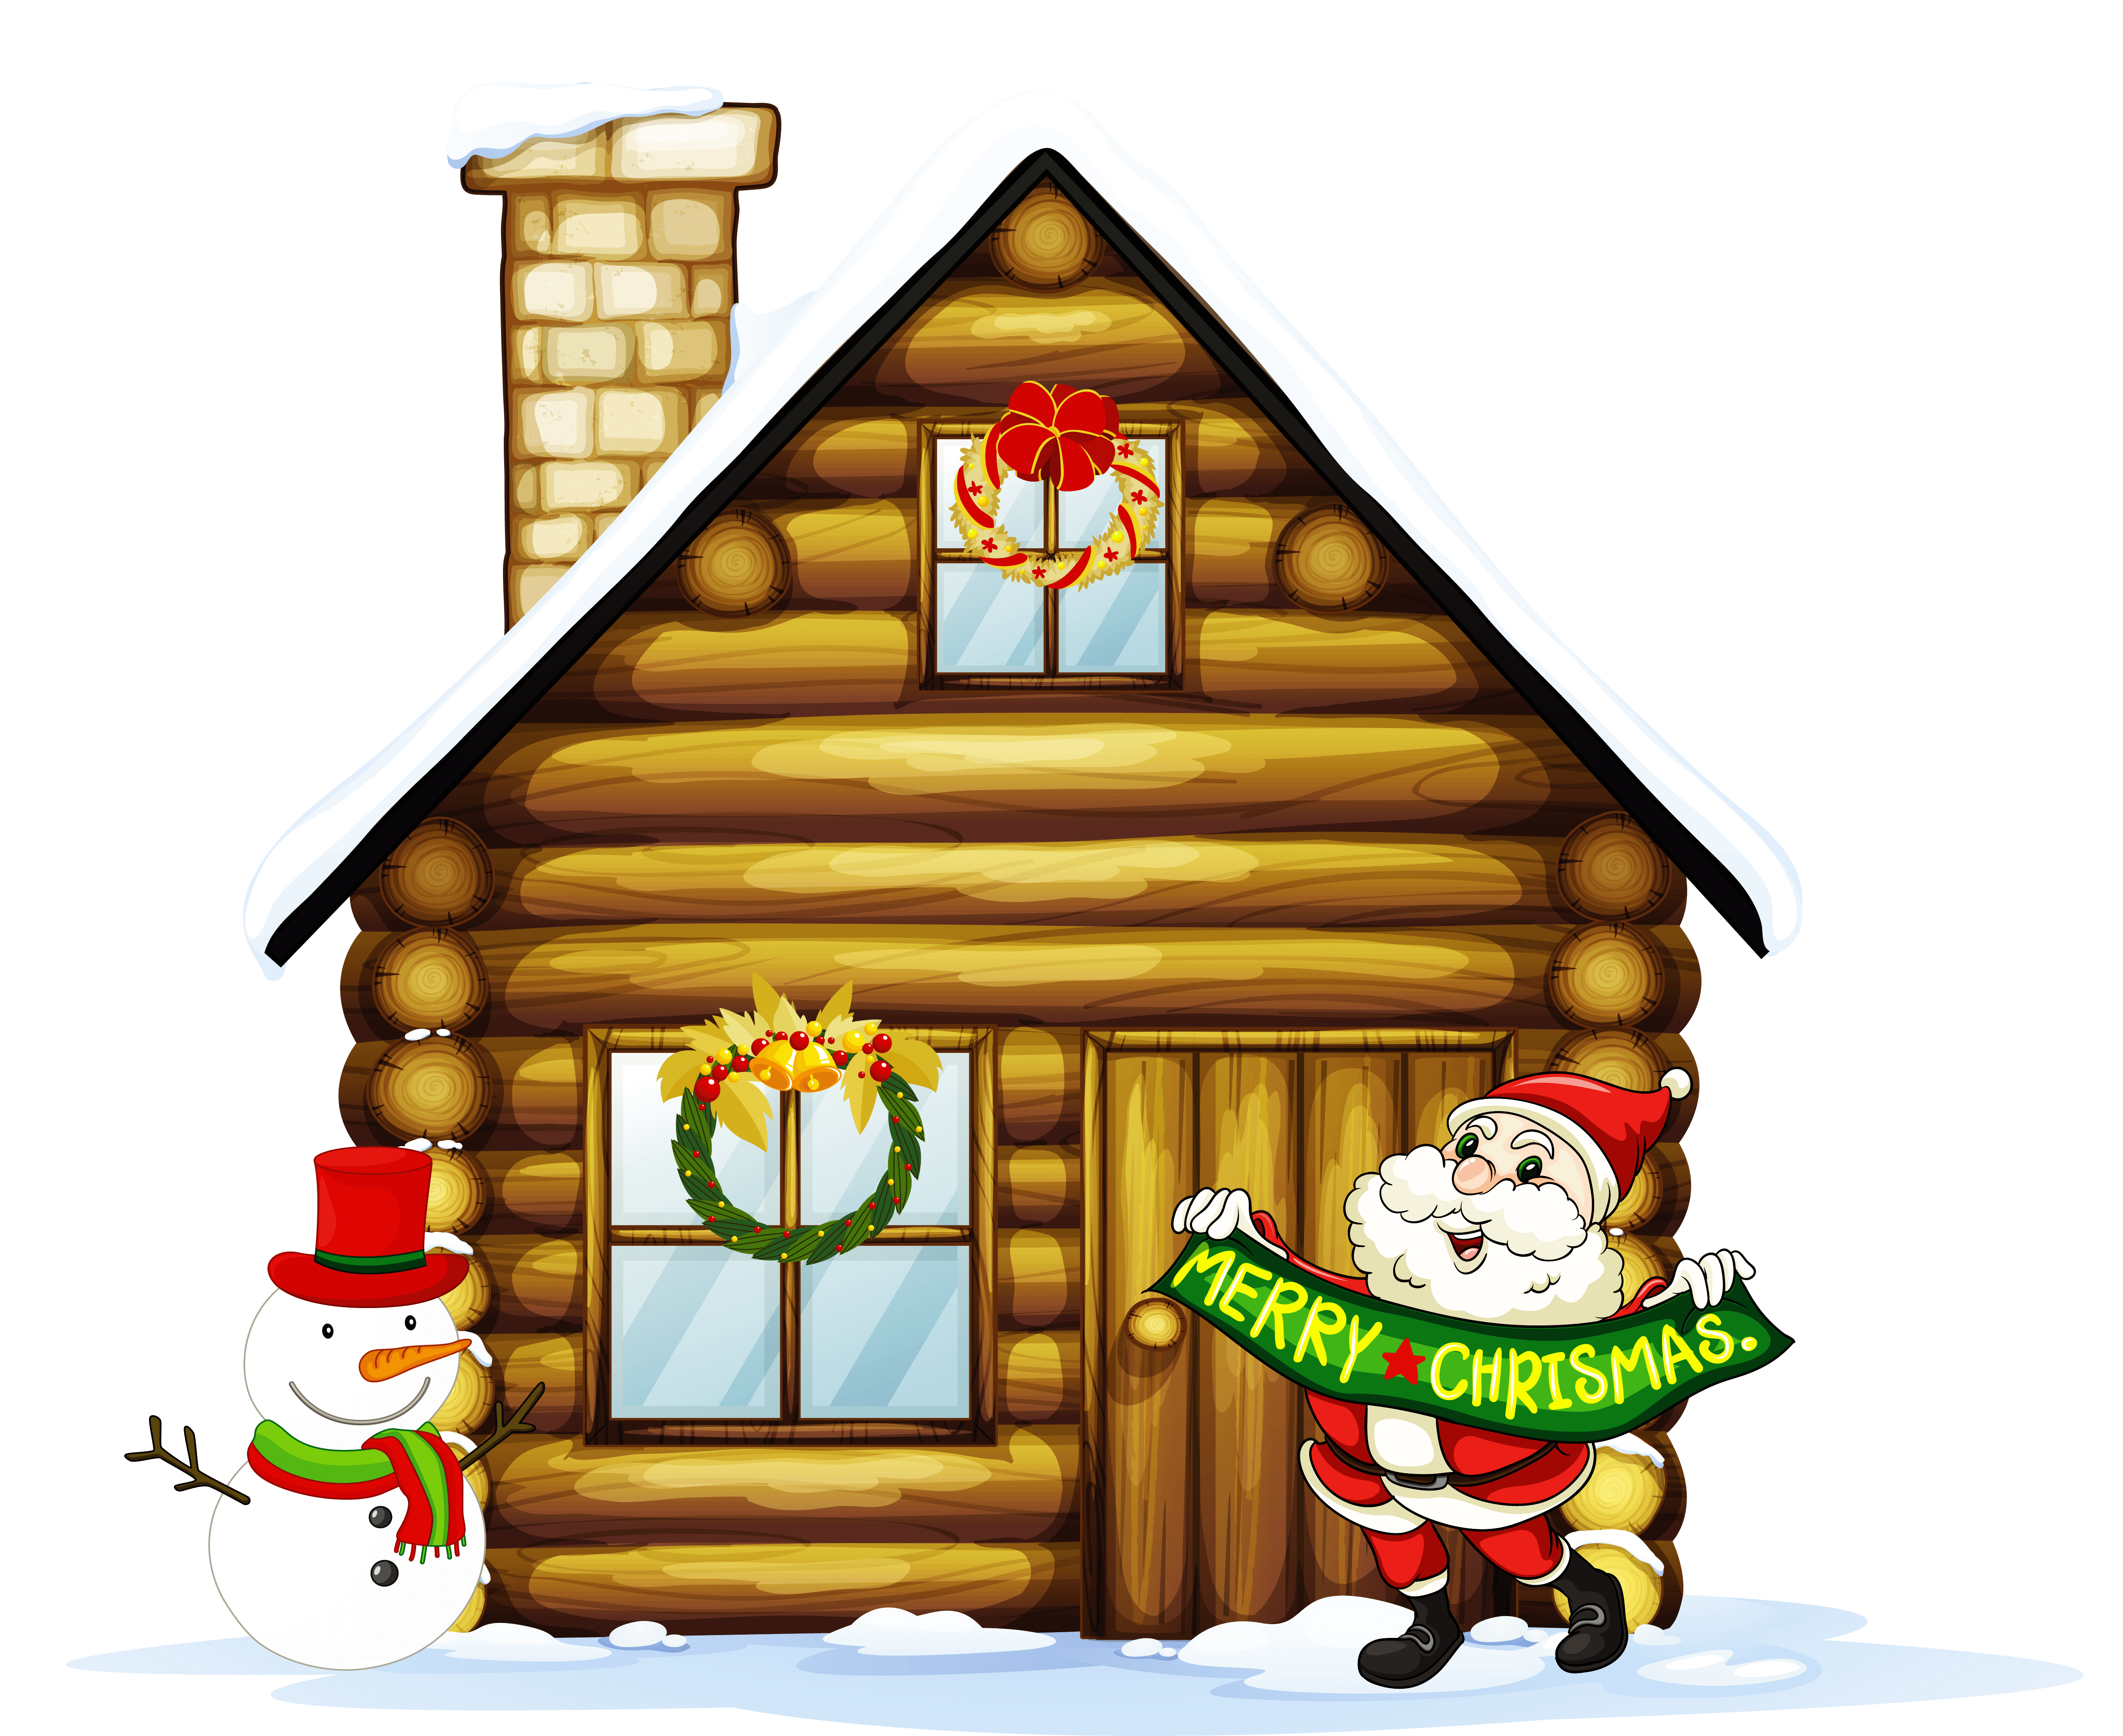 Christmas house merry and. Houses clipart xmas